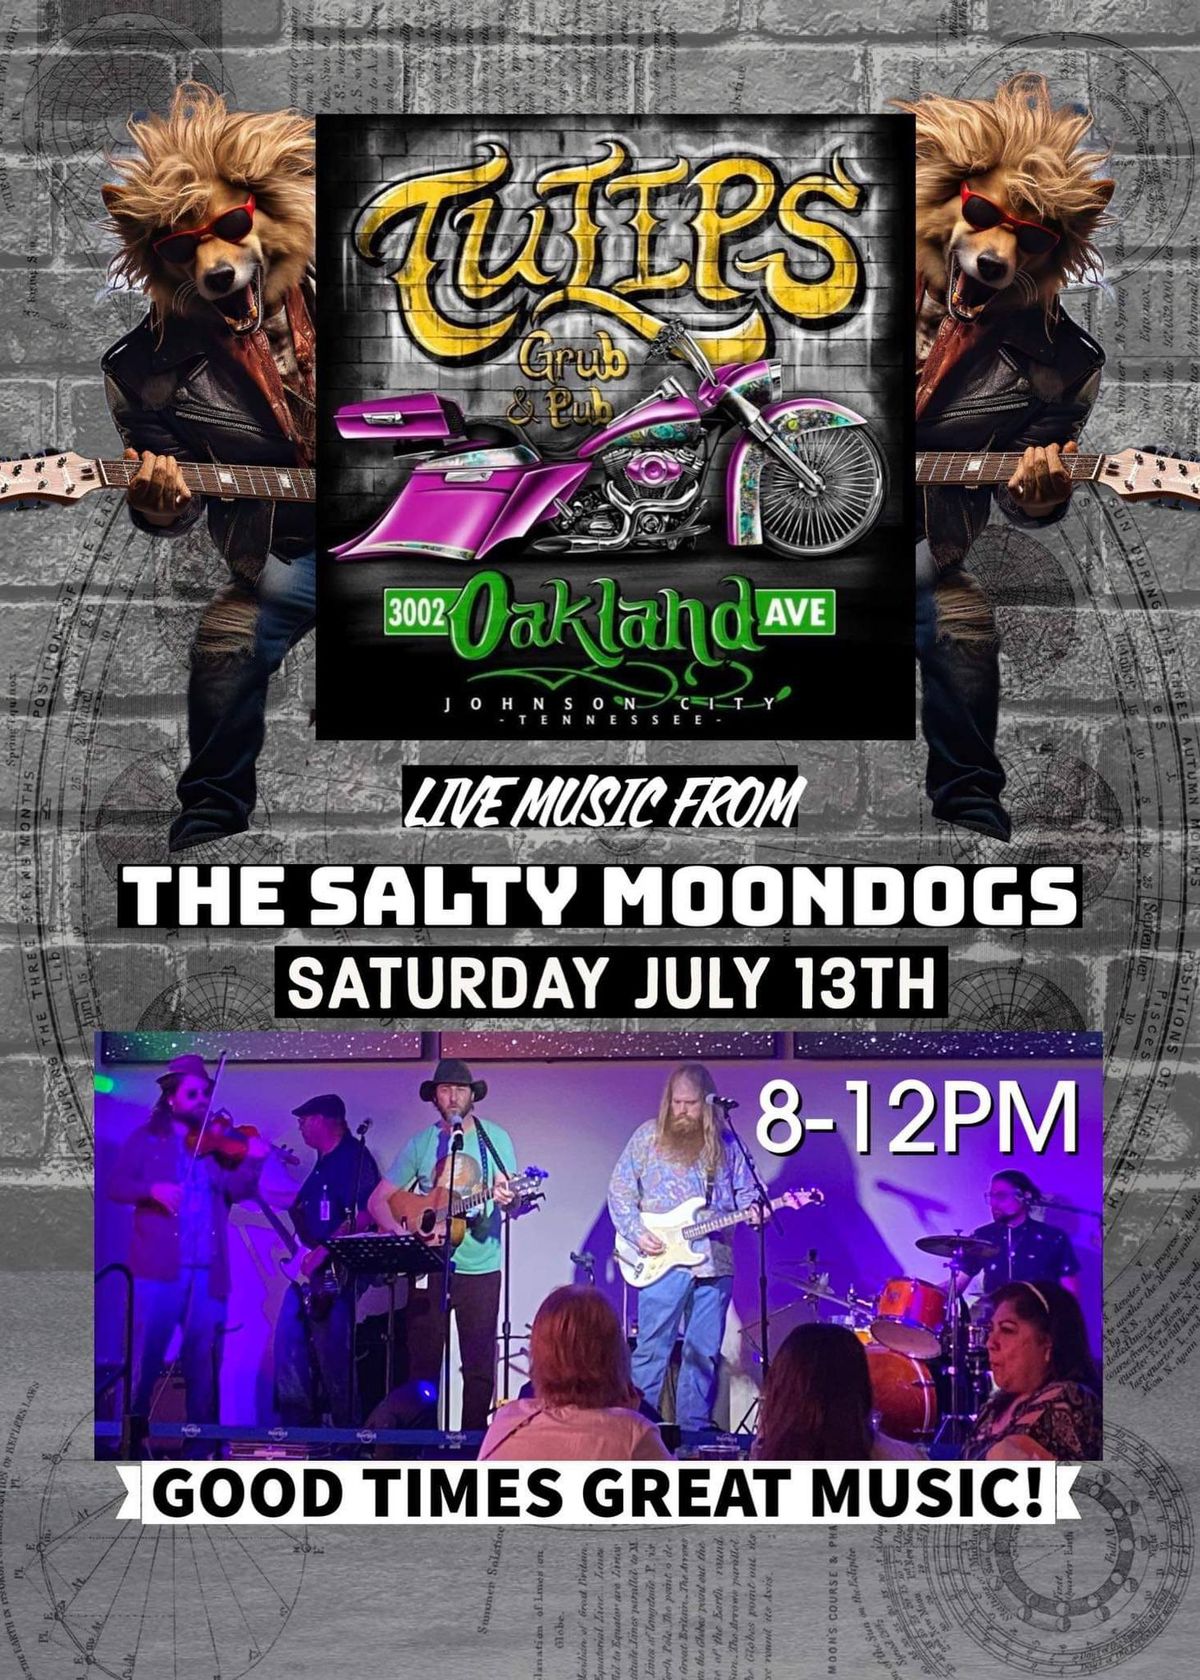 Salty Moon Dogs Band 